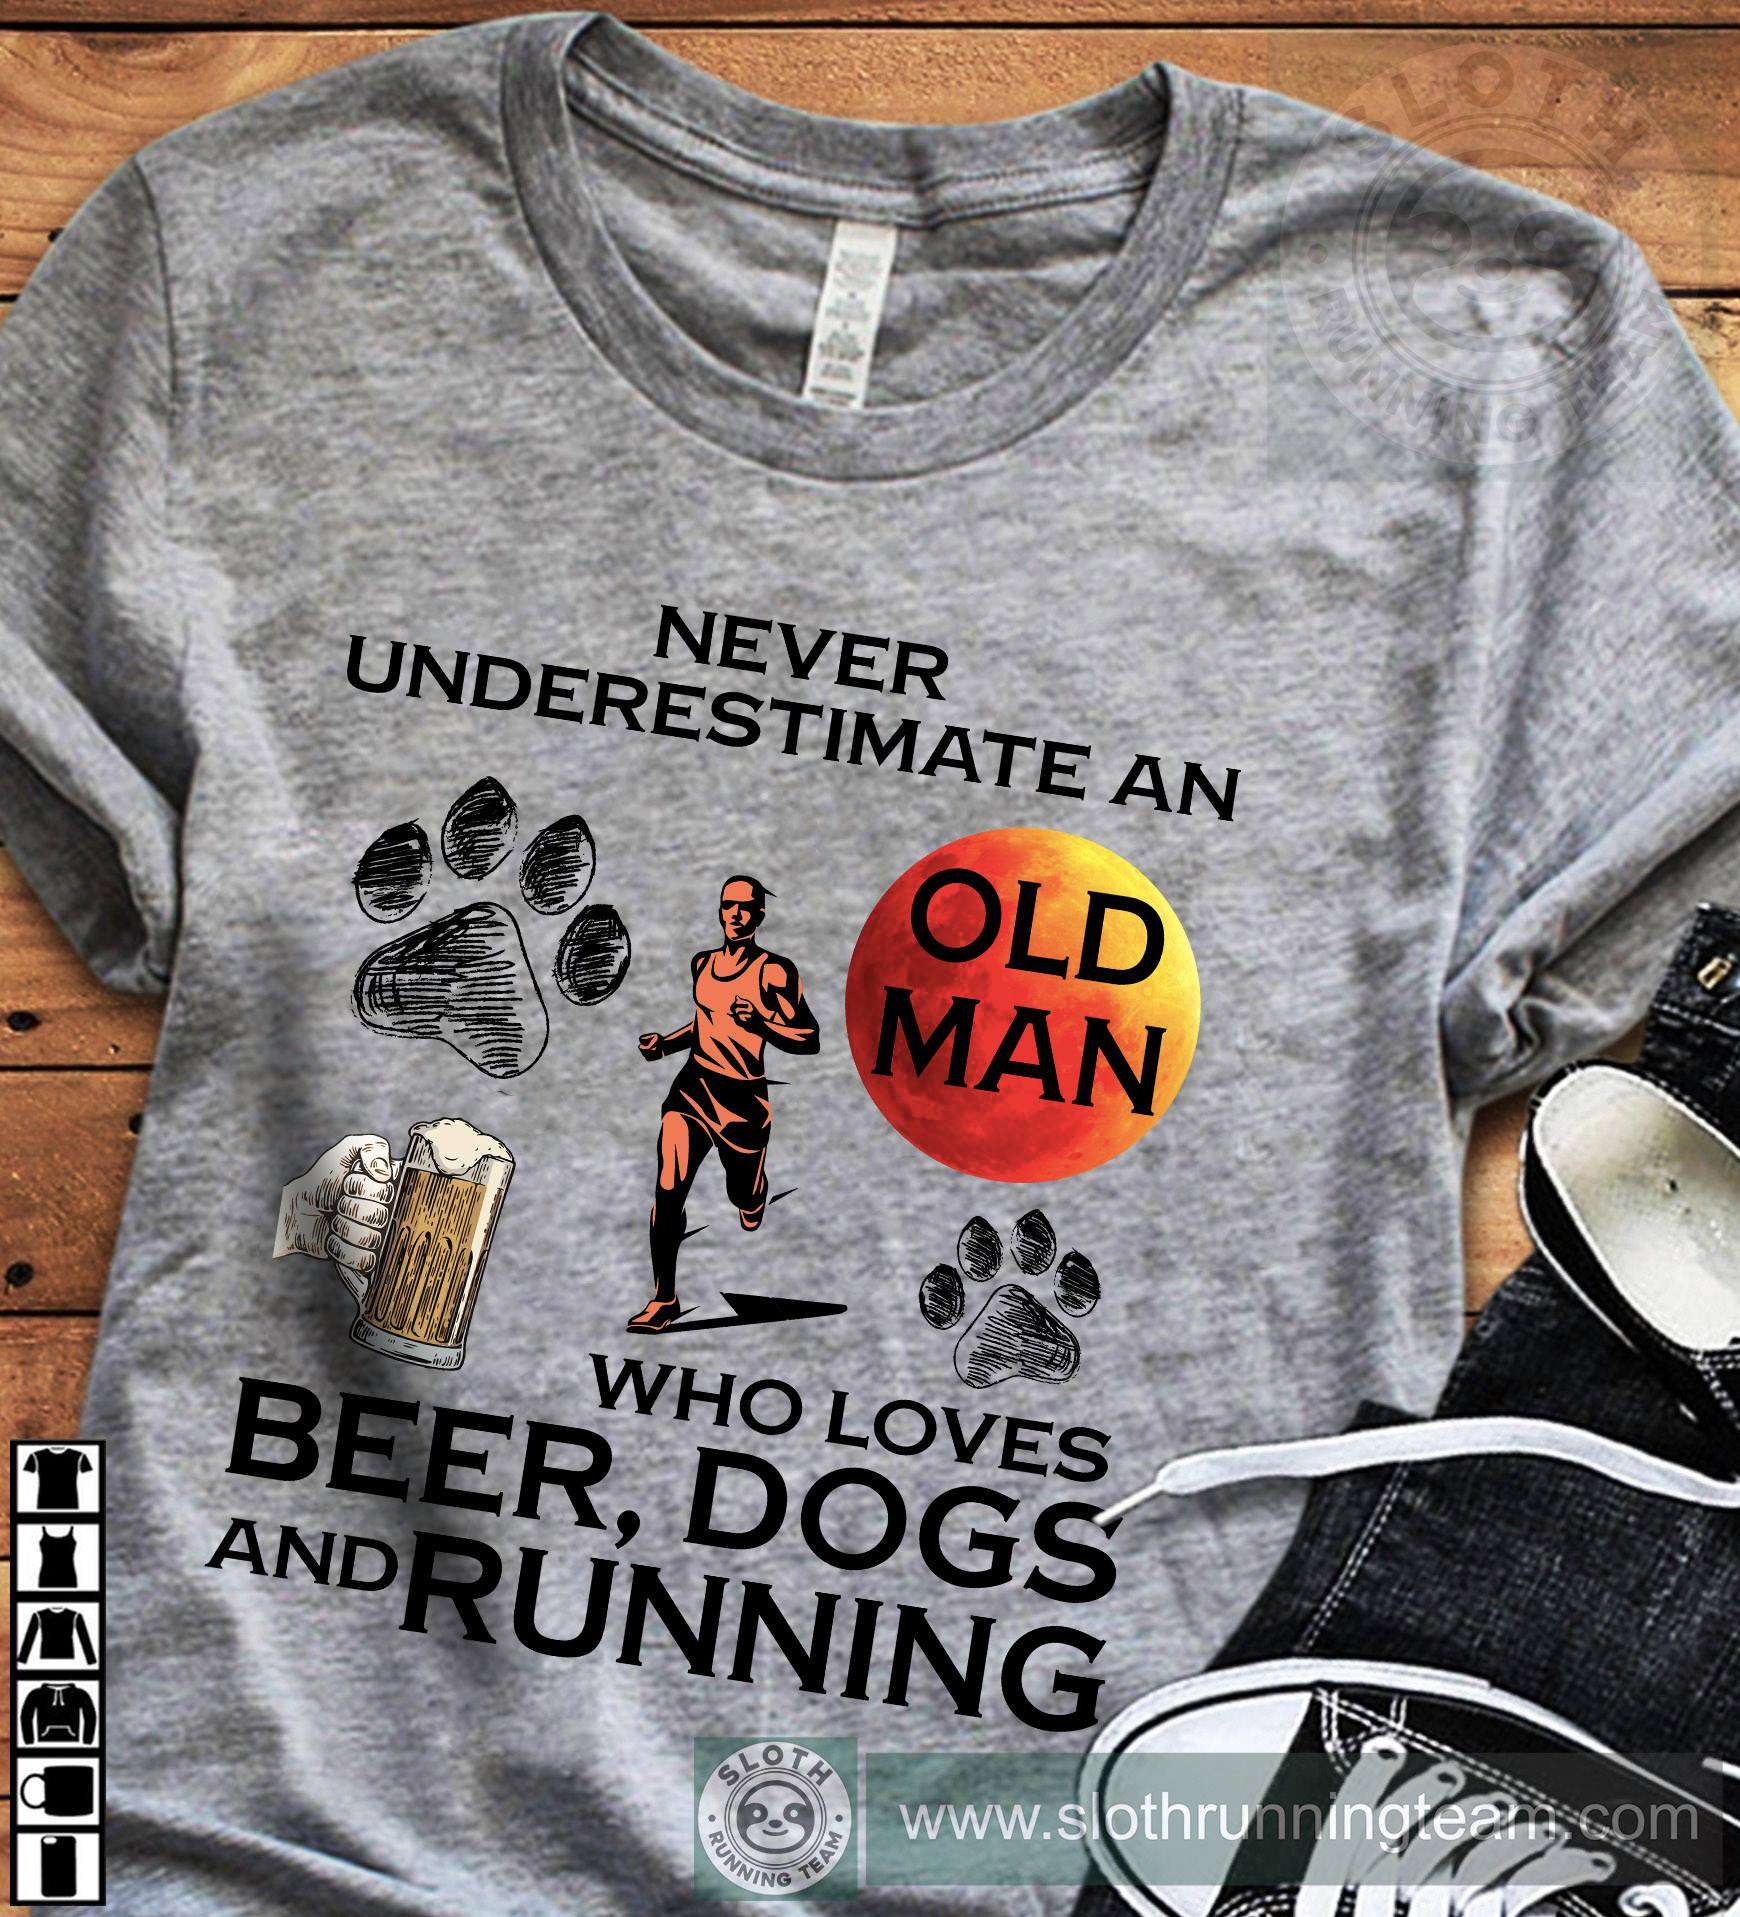 Never underestimate an old man who loves beer dogs and running - Old man the runner, dog and beer